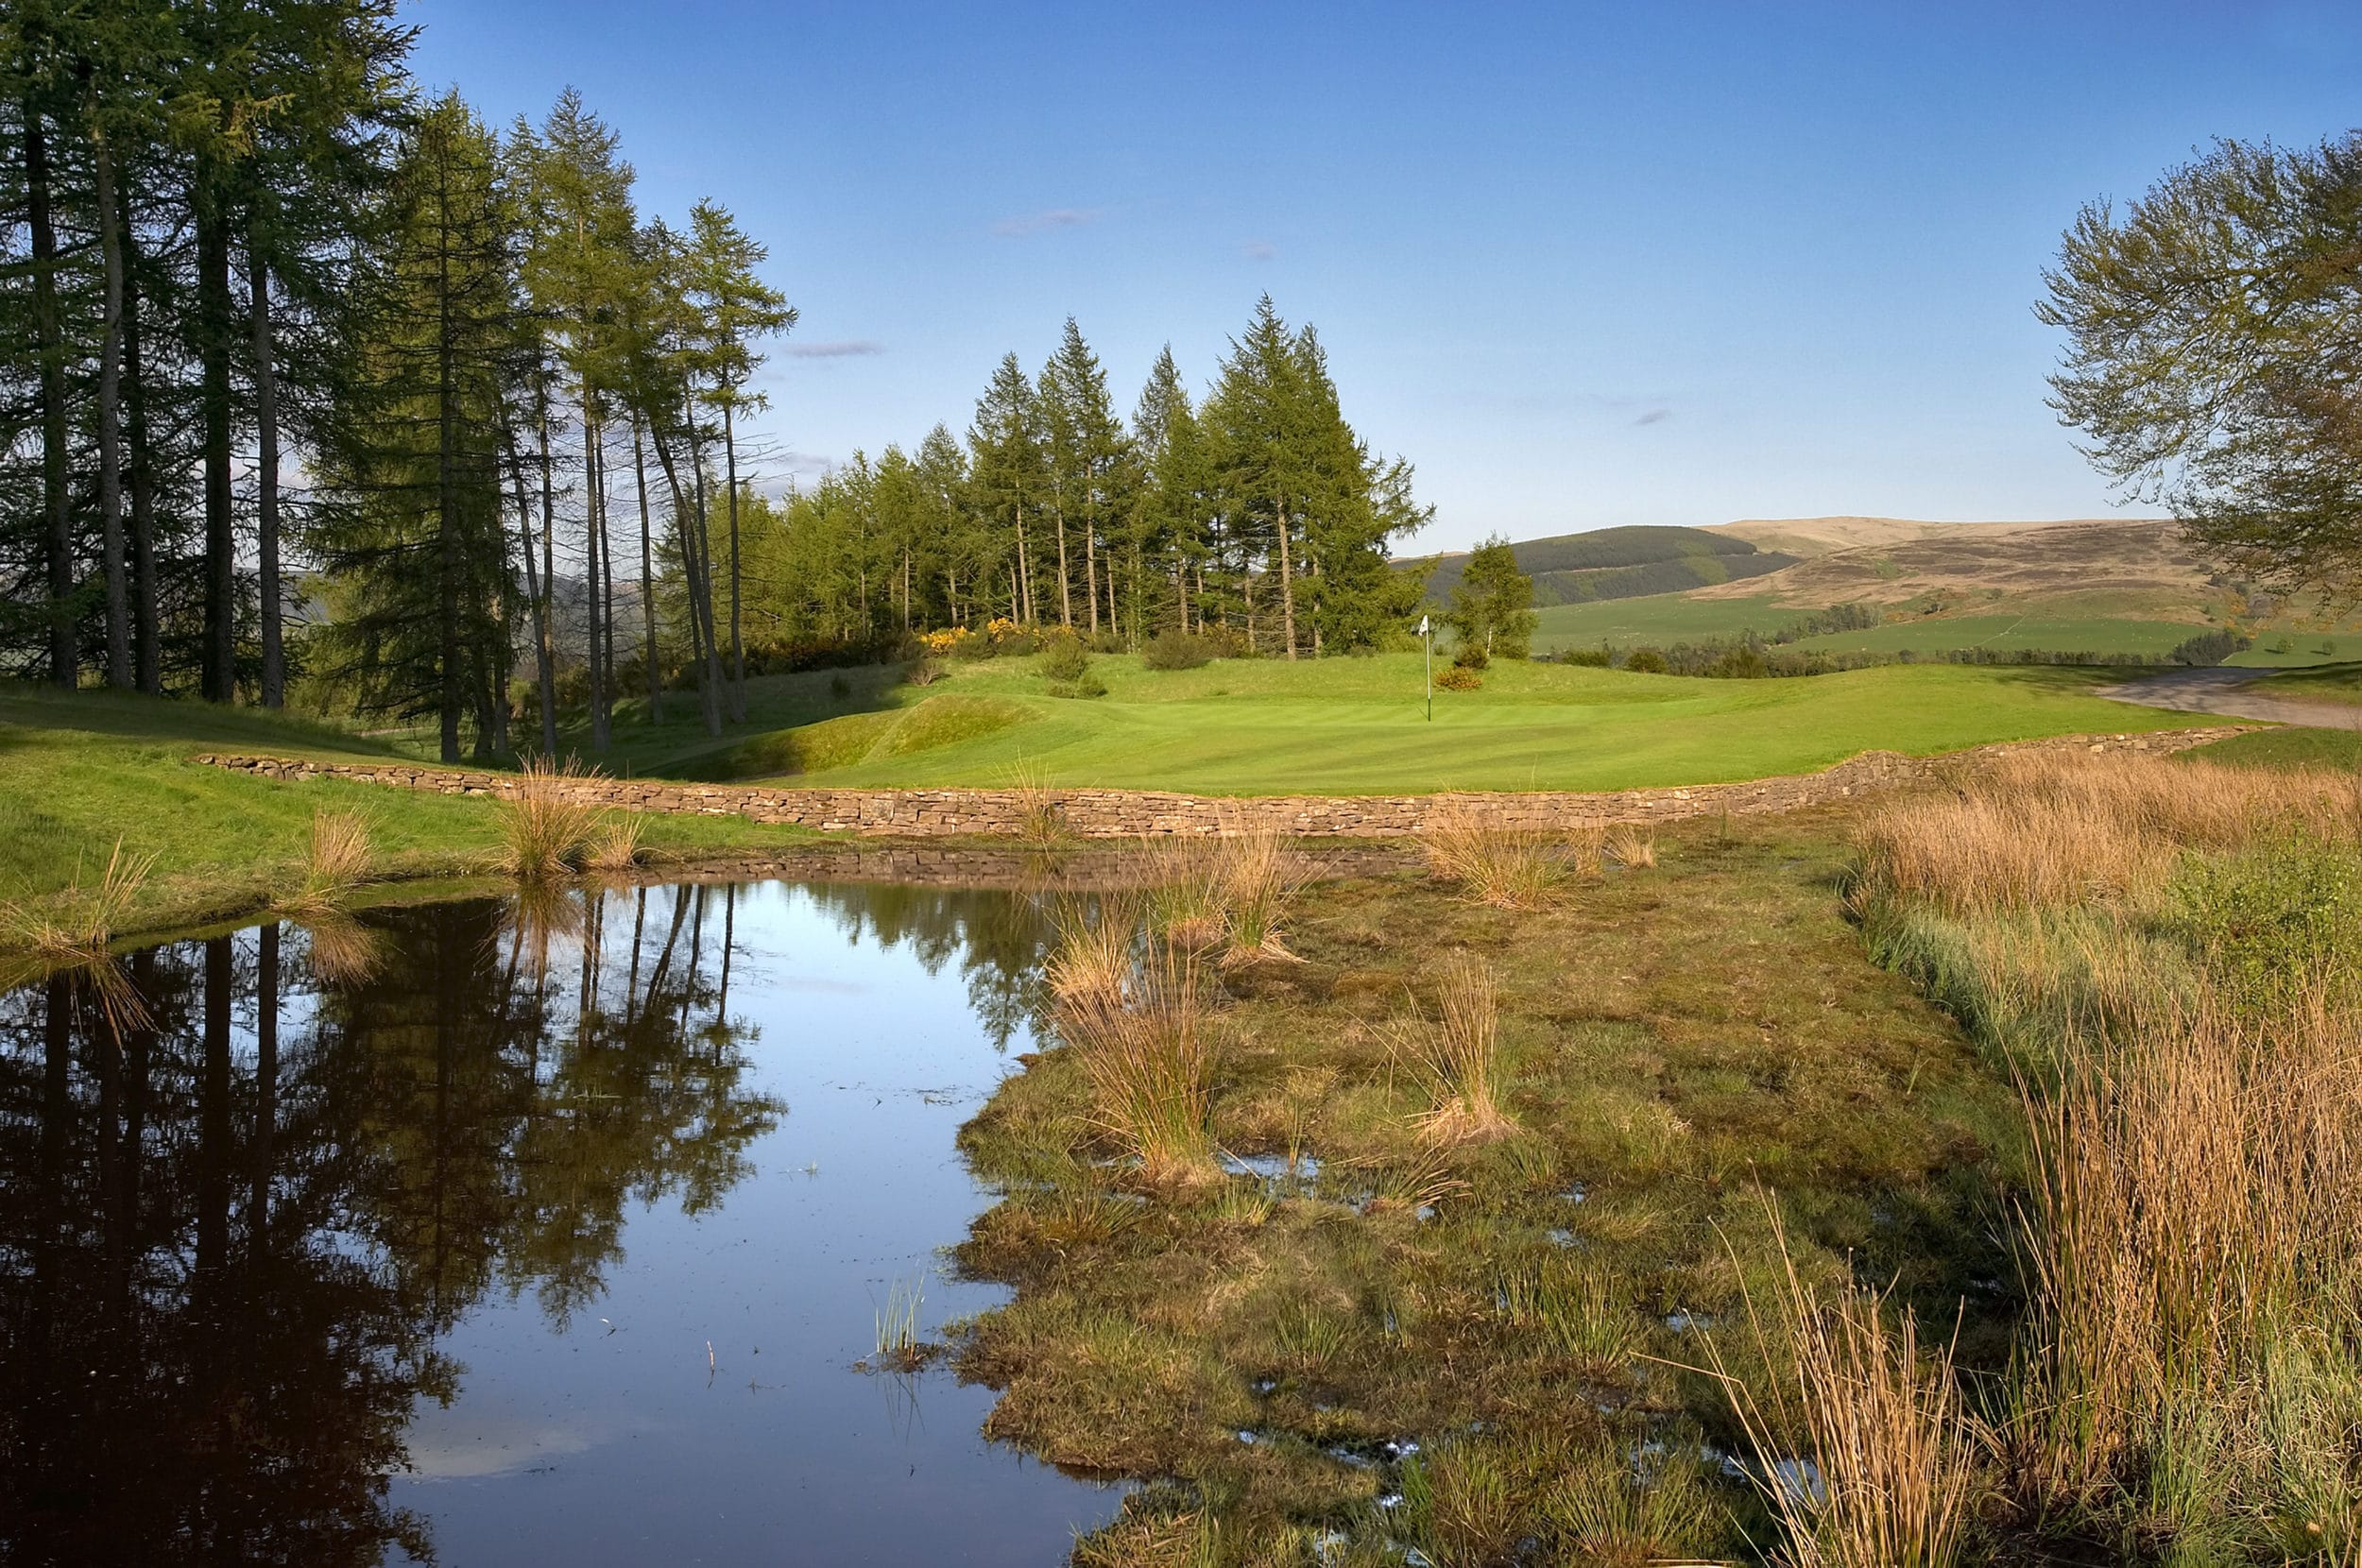 6th hole on PGA Centenary Course, The Gleneagles Hotel, Scotland. Showing re-modelling carried out 2004/05